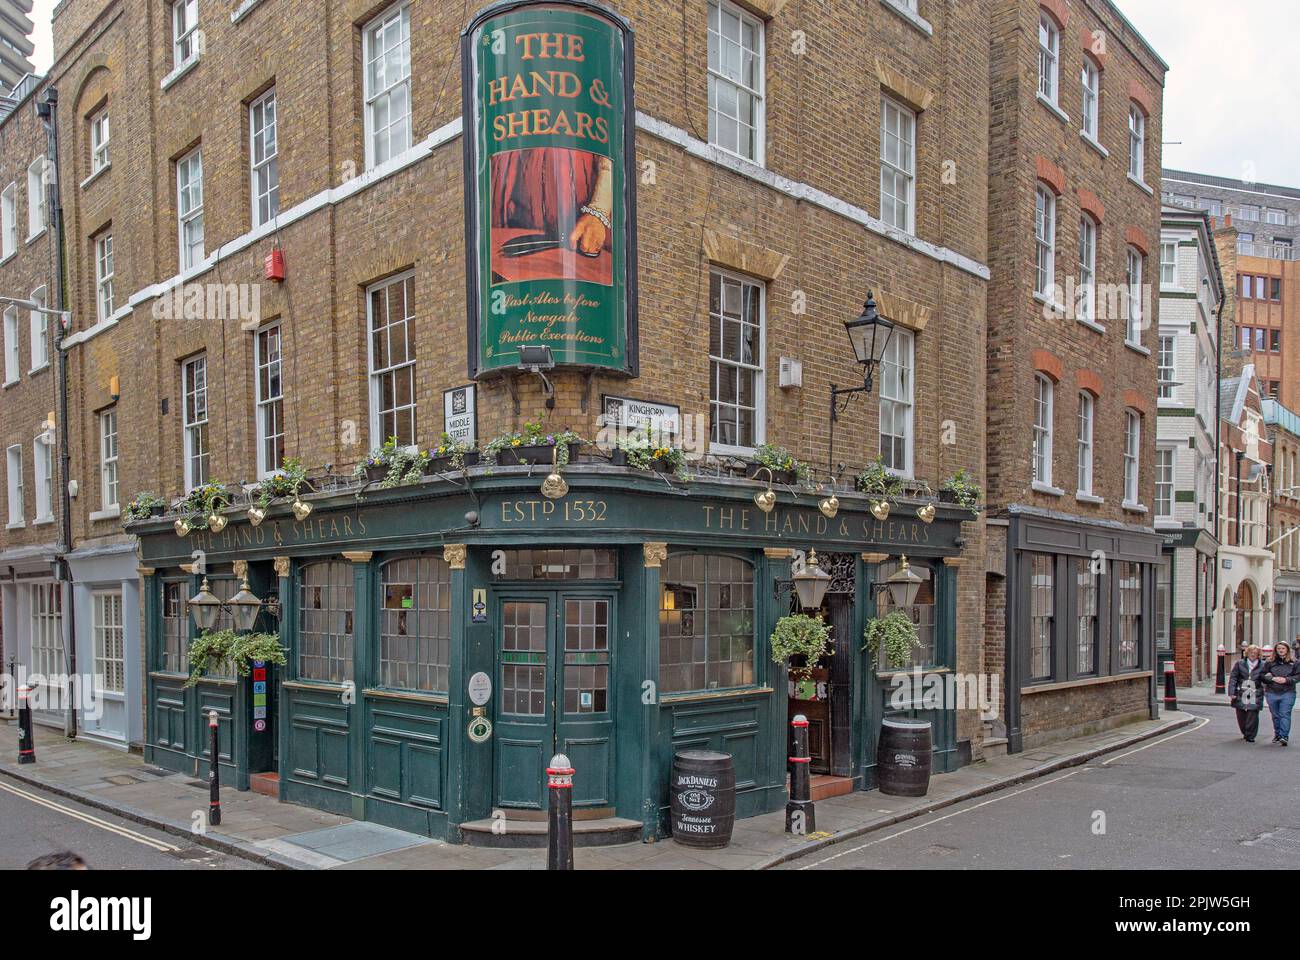 The Hand and Shears Pub in London, Großbritannien Stockfoto